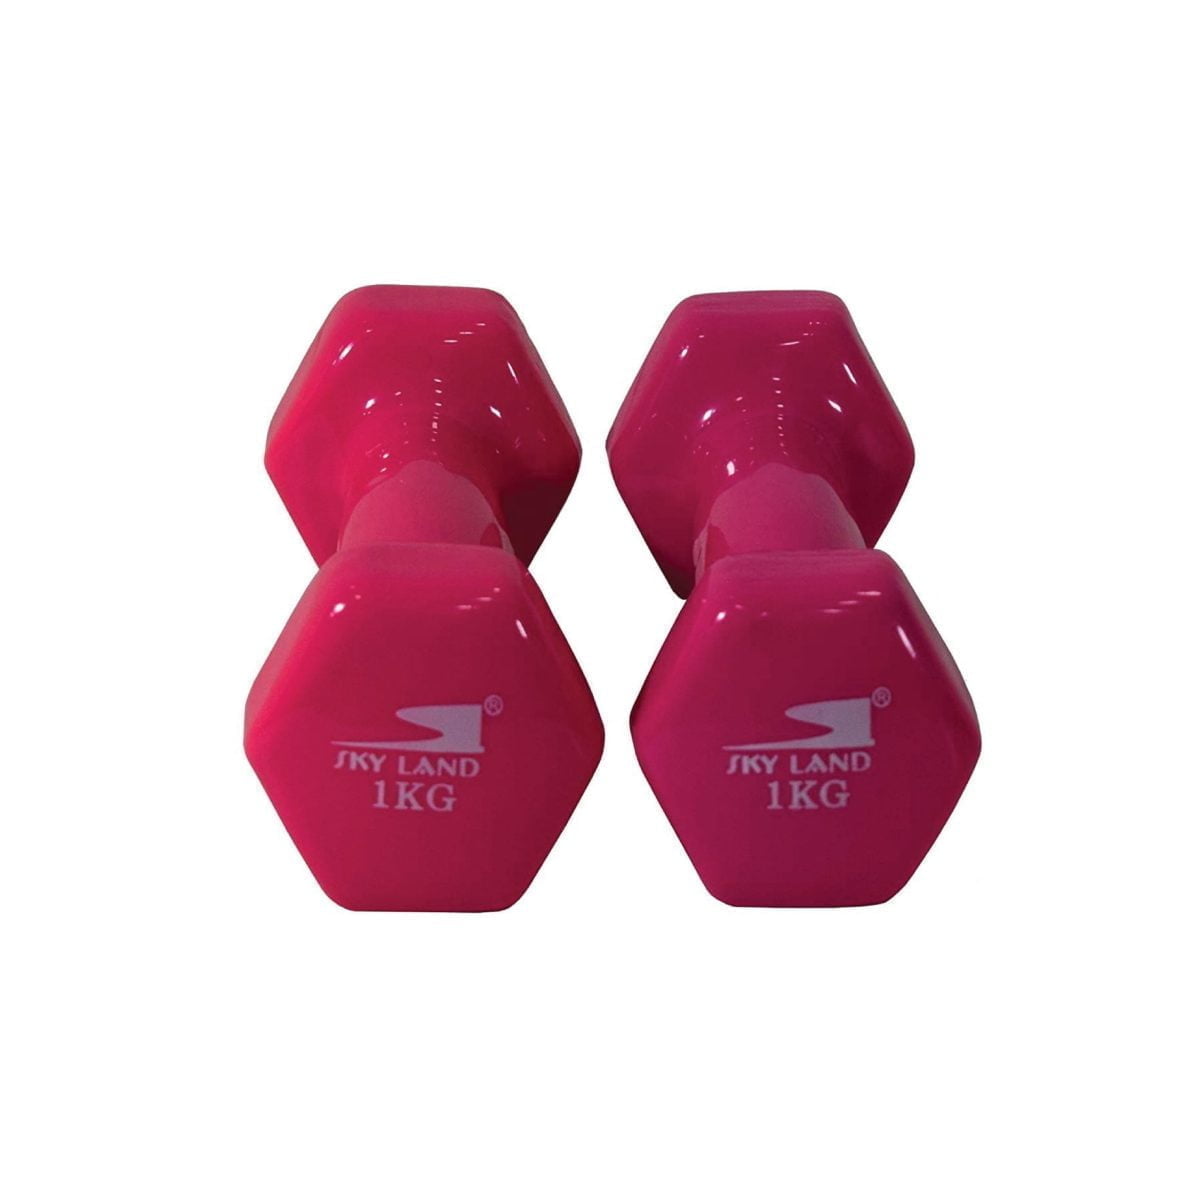 Axc 01 Scaled Labsport &Lt;H1&Gt;Deluxe Vinyl Dumbbell 2-Piece 1Kg&Lt;/H1&Gt; Deluxe Vinyl Dumbbell Constructed Of Heavy-Duty Solid Cast Iron Core To Add More Durability And Stability. Will Not Break Or Bend After Repeated Use. These Durable Hand Weights Are The Perfect Addition To Aerobics And Step Workouts, As Well As Any Standard Strength Training With Weights For Added Intensity And Resistance. Skyland Deluxe Vinyl Dumbbells -Em-9219R-3 Provides A Comfortable Feel To Handle And A Snug Grip For Sweaty Hands. Our Dumbbells Is A Great Assistant In A Wide Range Of Training And Fitness Exercises. Tone All Over Muscles, Lose More Weight And Enhance Your Body Strength By Using It To Perform Curls, Triceps Extension And Bench Press Or Shoulder Press Or Simply Use It When You Walk Or Do Aerobics Exercises To Add More Weight And Thus Improve Your Core Strength. Deluxe Vinyl Dumbbell 2-Piece 1Kg